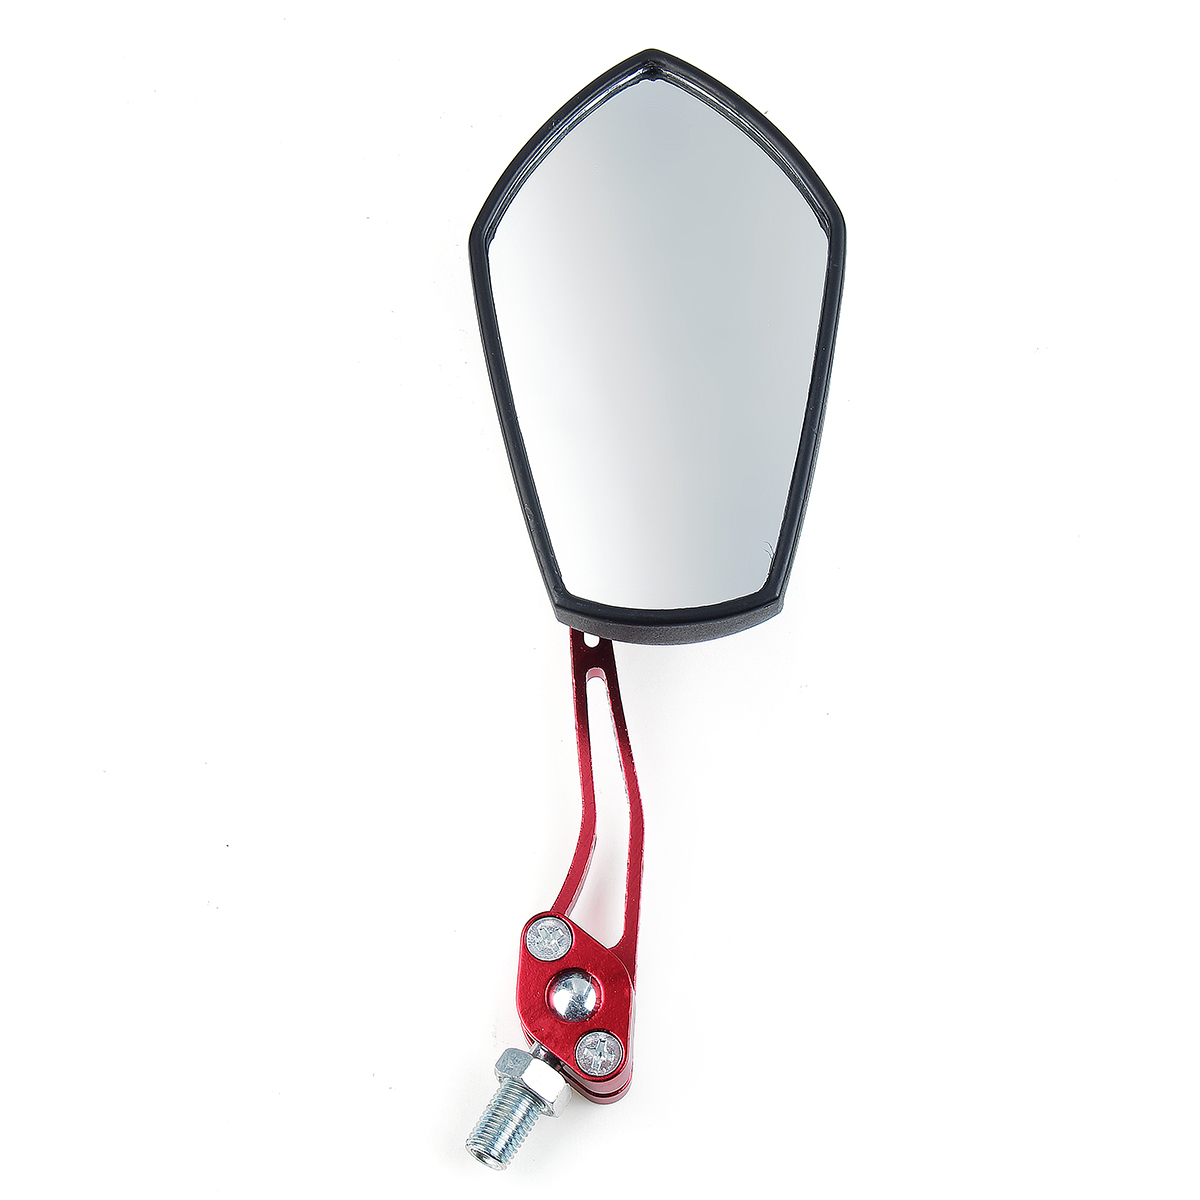 10Mm Universal Motorcycle Aluminum Rod Rearview Side Mirrors Sportbike for Honda - Auto GoShop